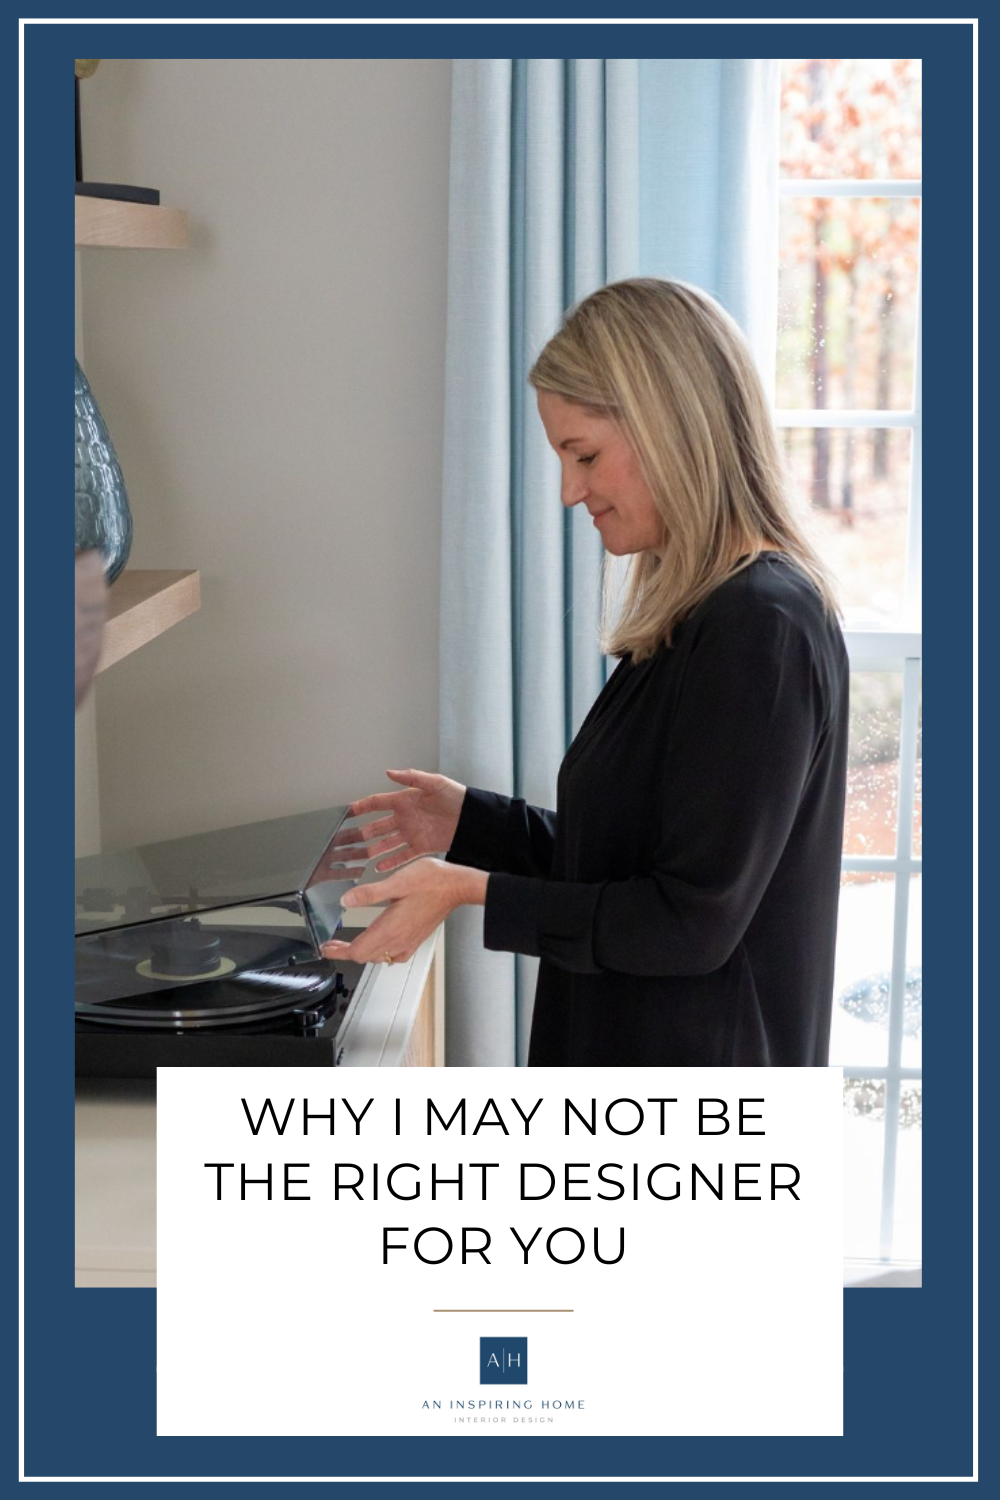 Why I May Not Be the Right Designer for You